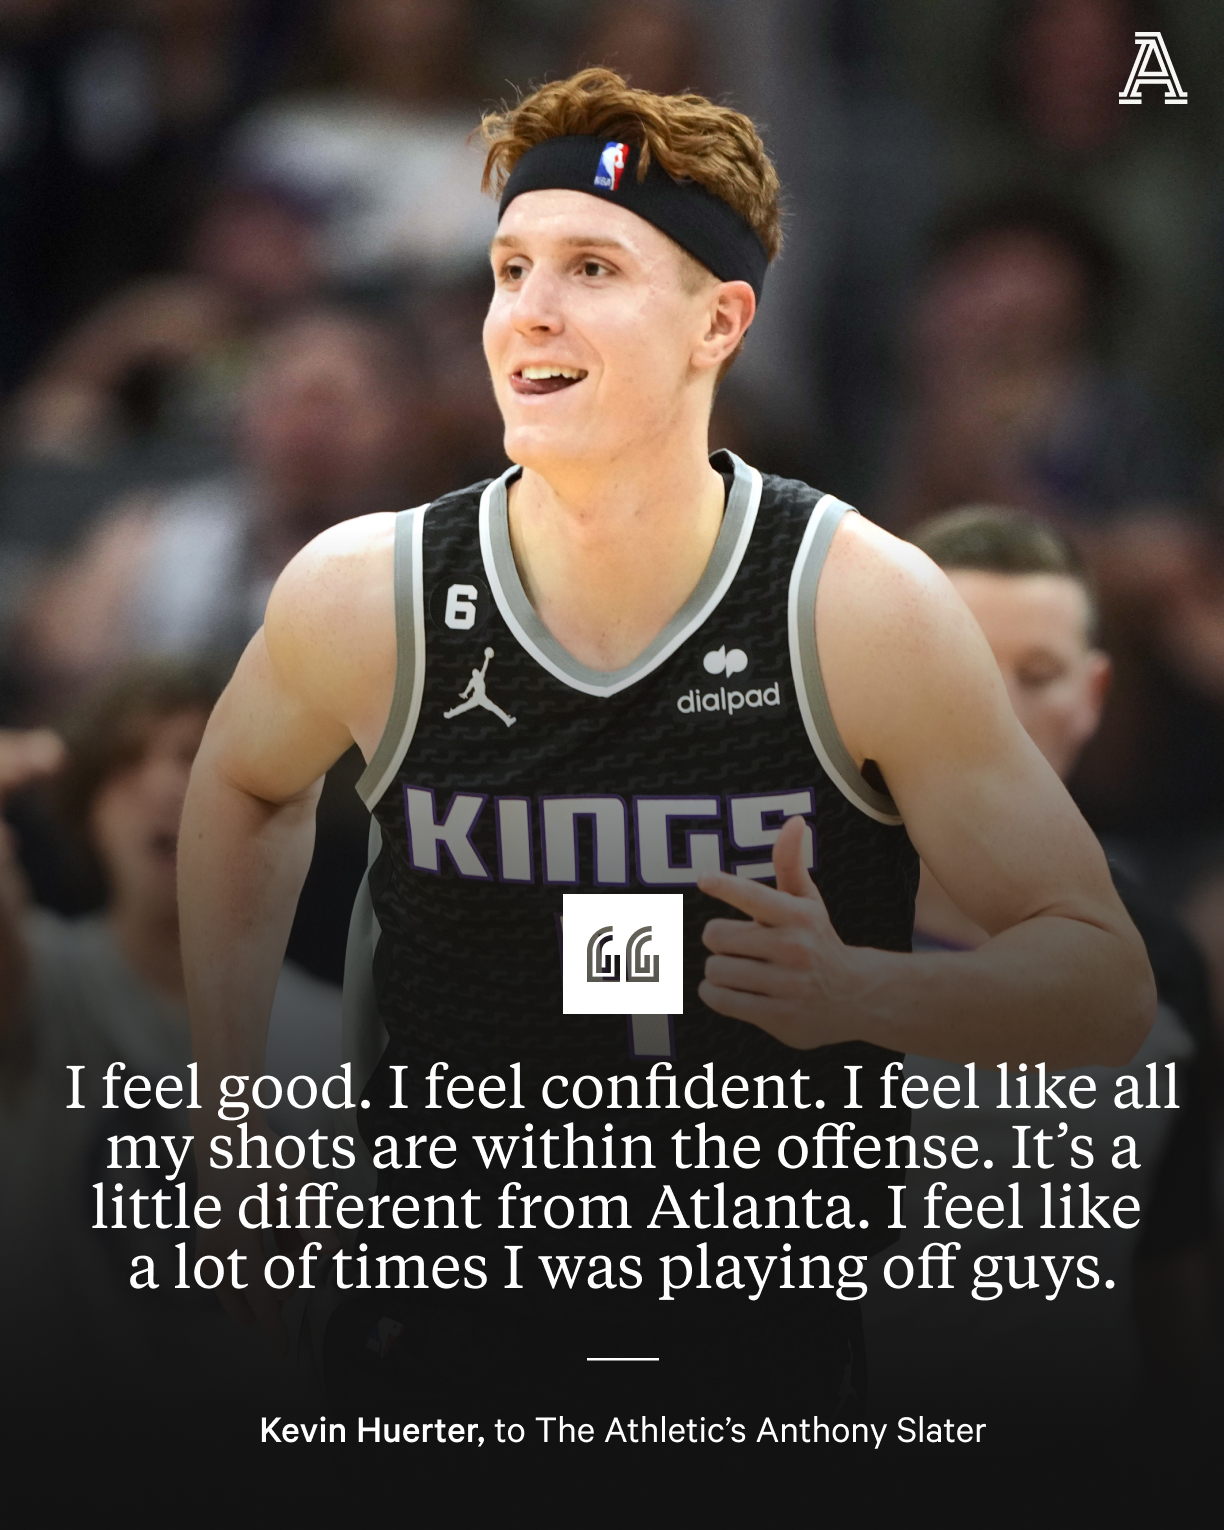 Kevin Huerter Don’t Bother Me I’m Watching The Kings Shirt - Rockatee